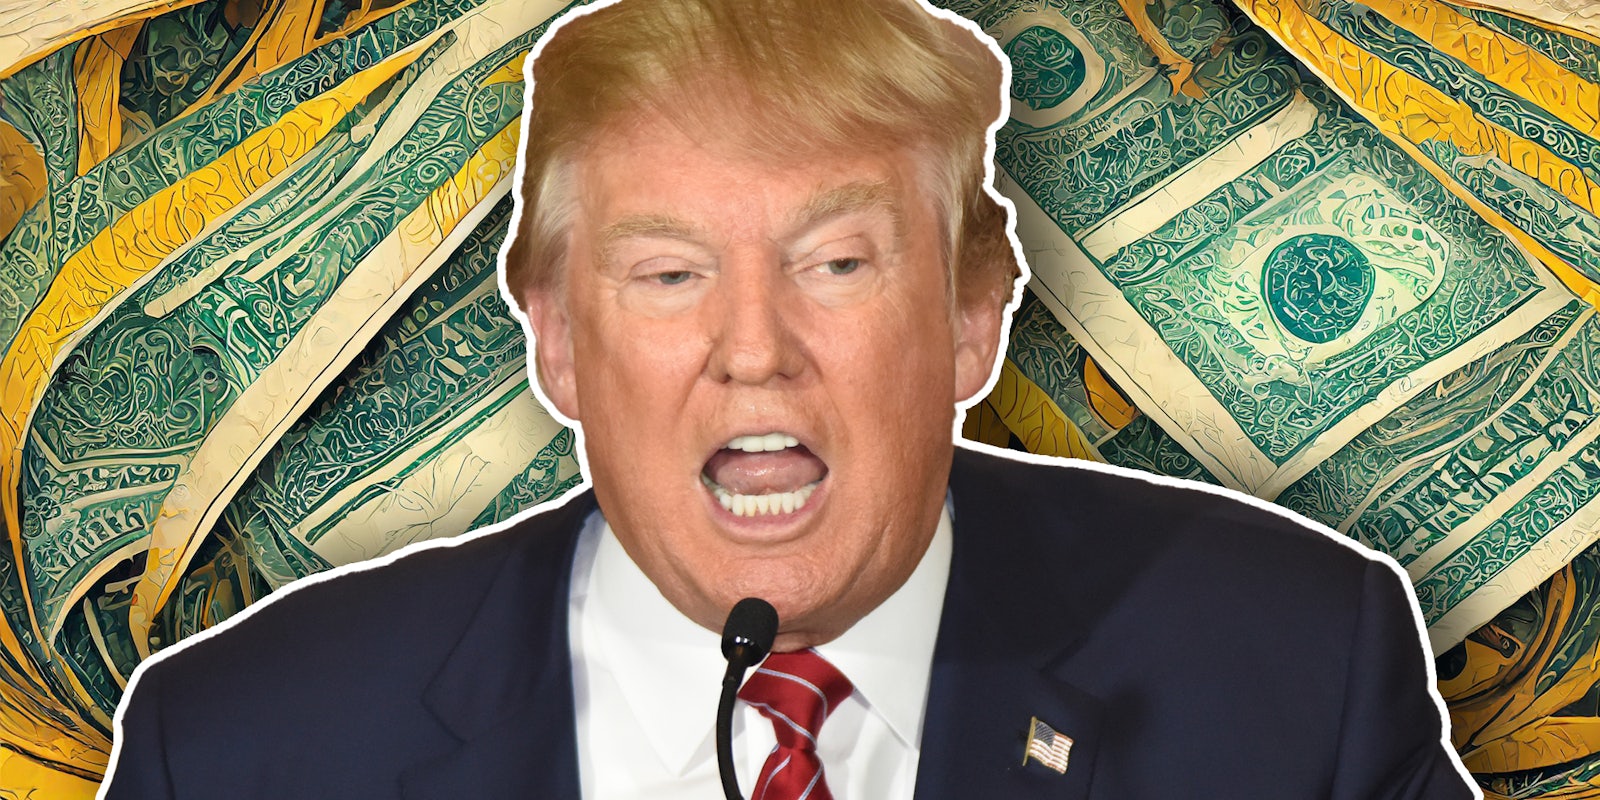 Donald Trump in front of AI image of money